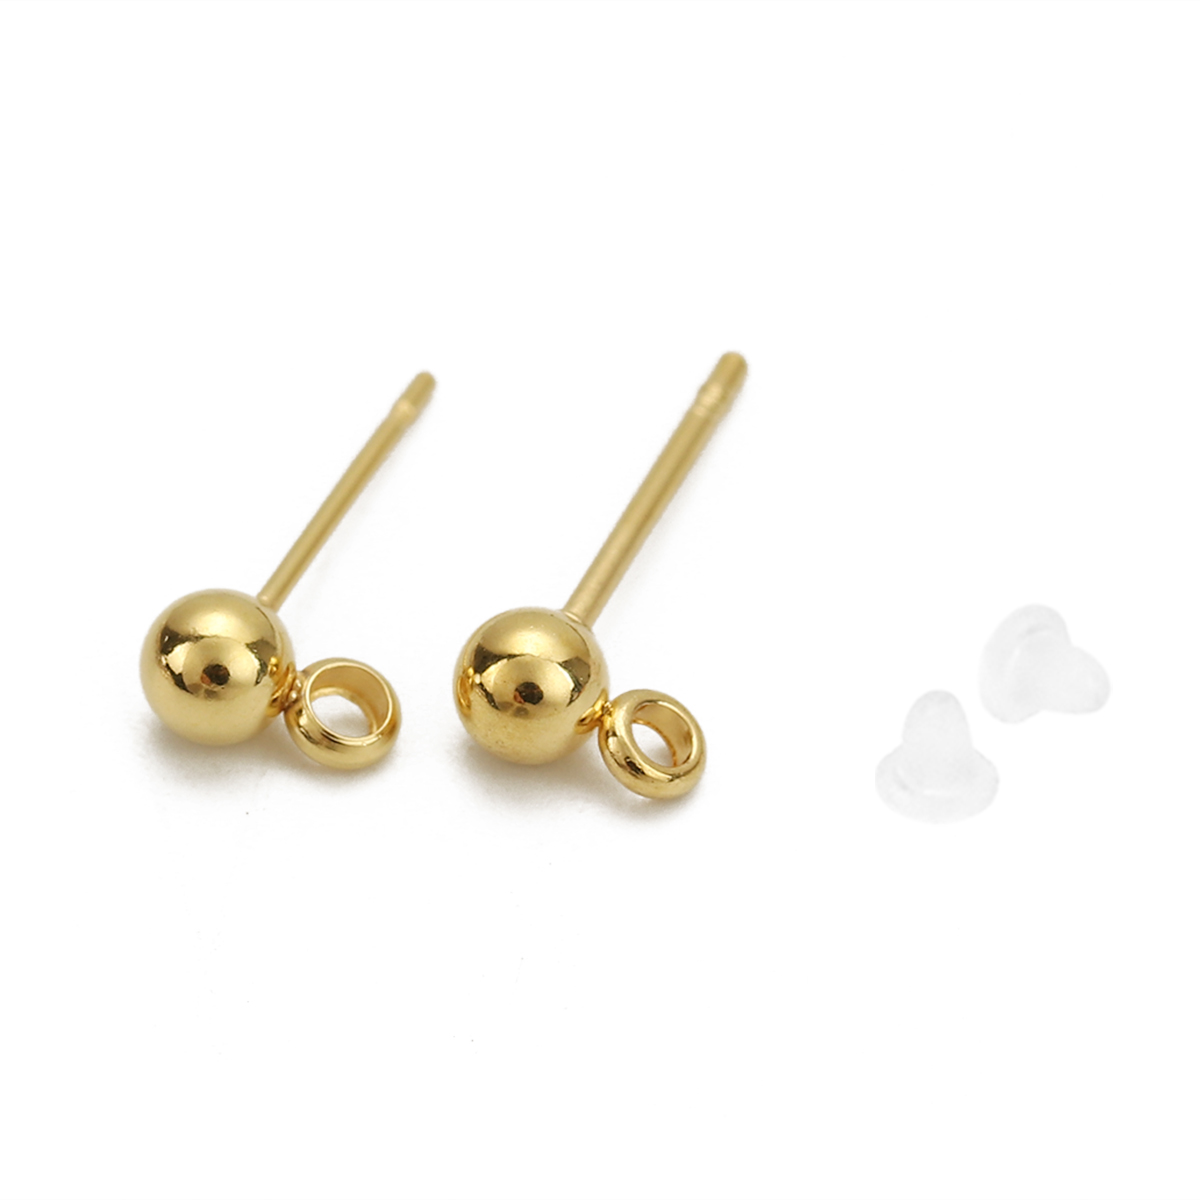 Picture of 304 Stainless Steel Ear Post Stud Earrings Ball Gold Plated W/ Loop 7mm( 2/8") x 4mm( 1/8"), Post/ Wire Size: (21 gauge), 6 PCs